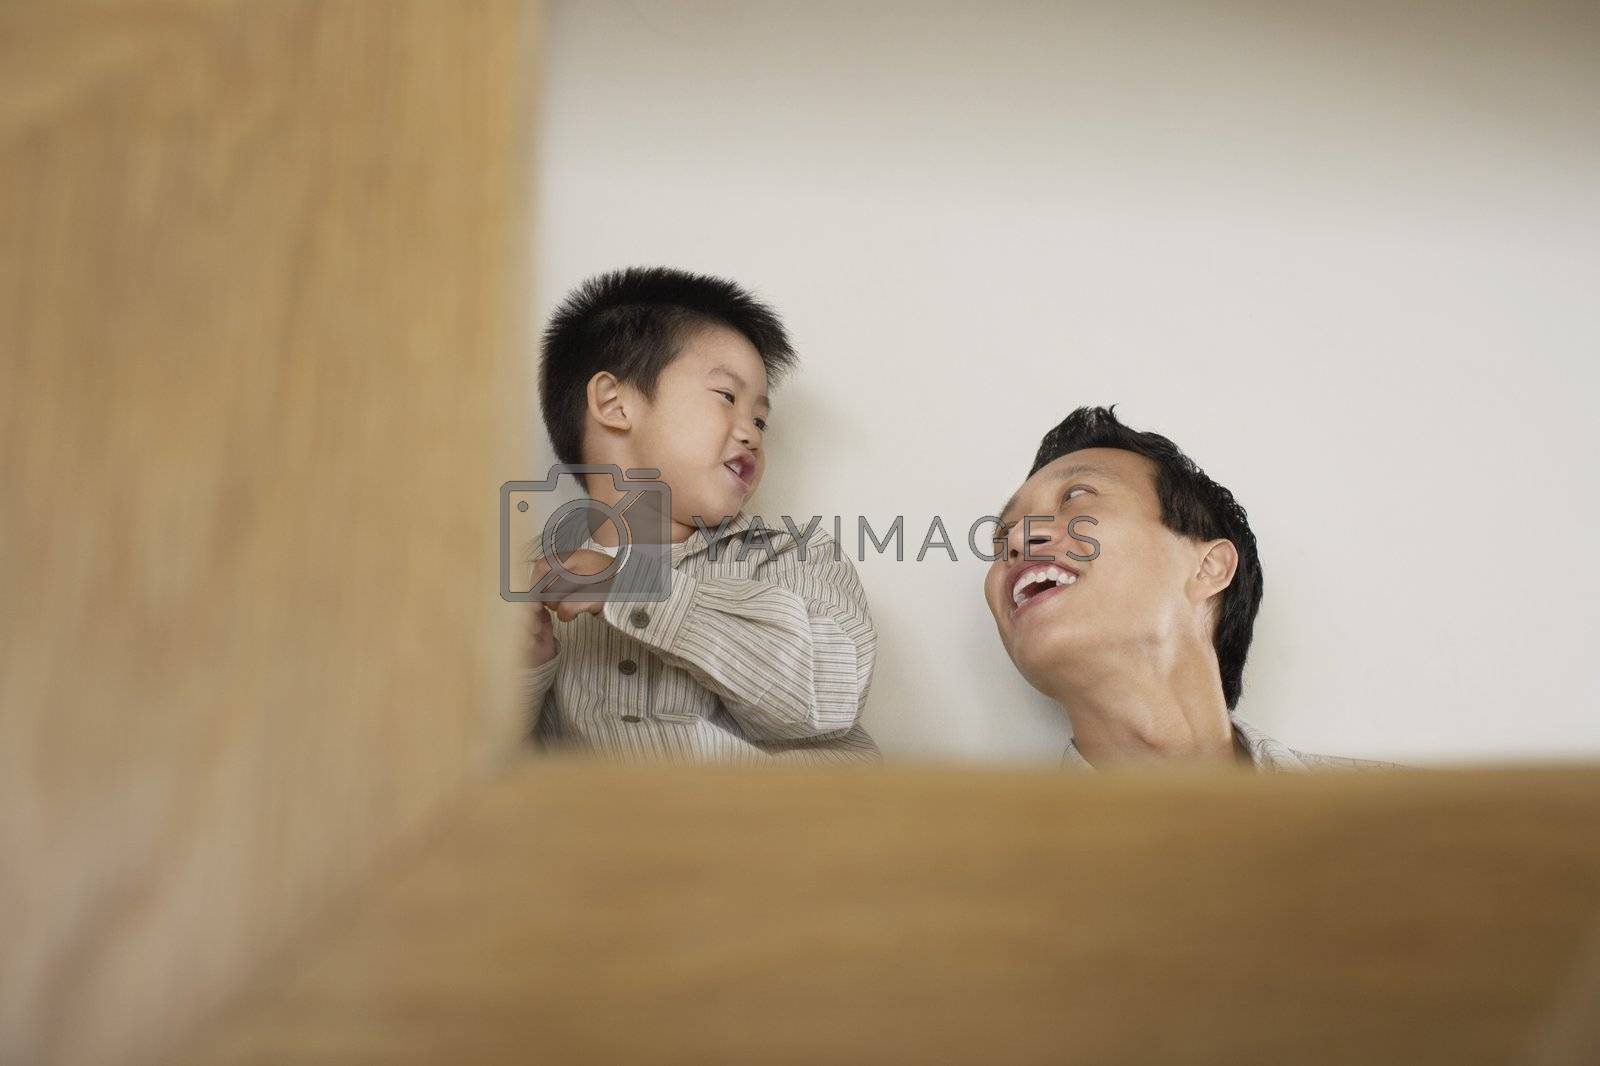 Royalty free image of Young Man with Son by moodboard